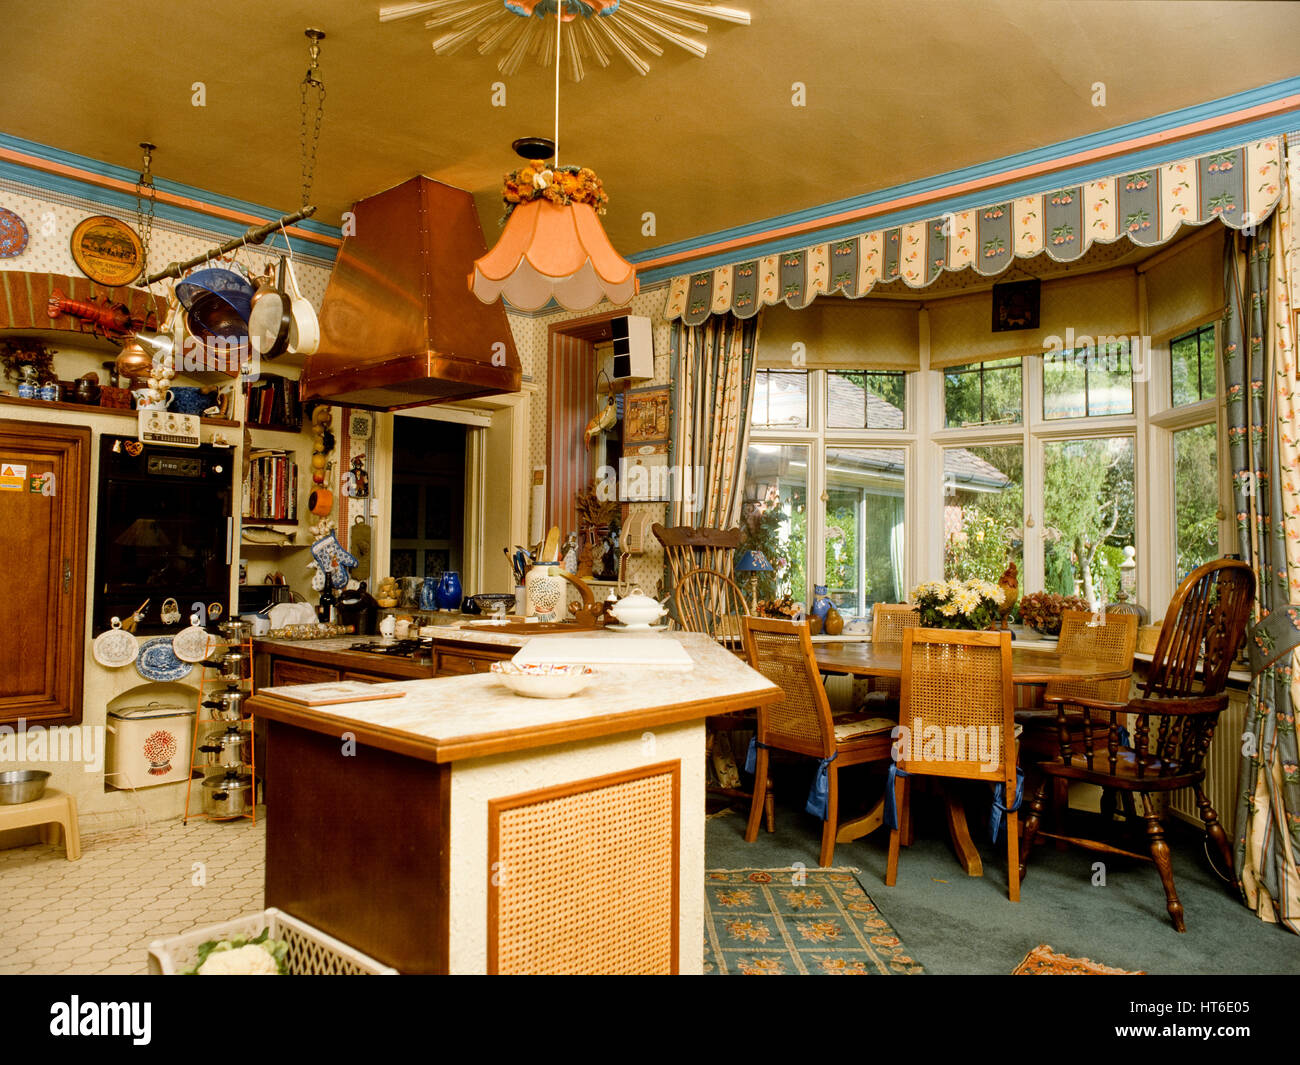 Country style kitchen and dining room. Stock Photo